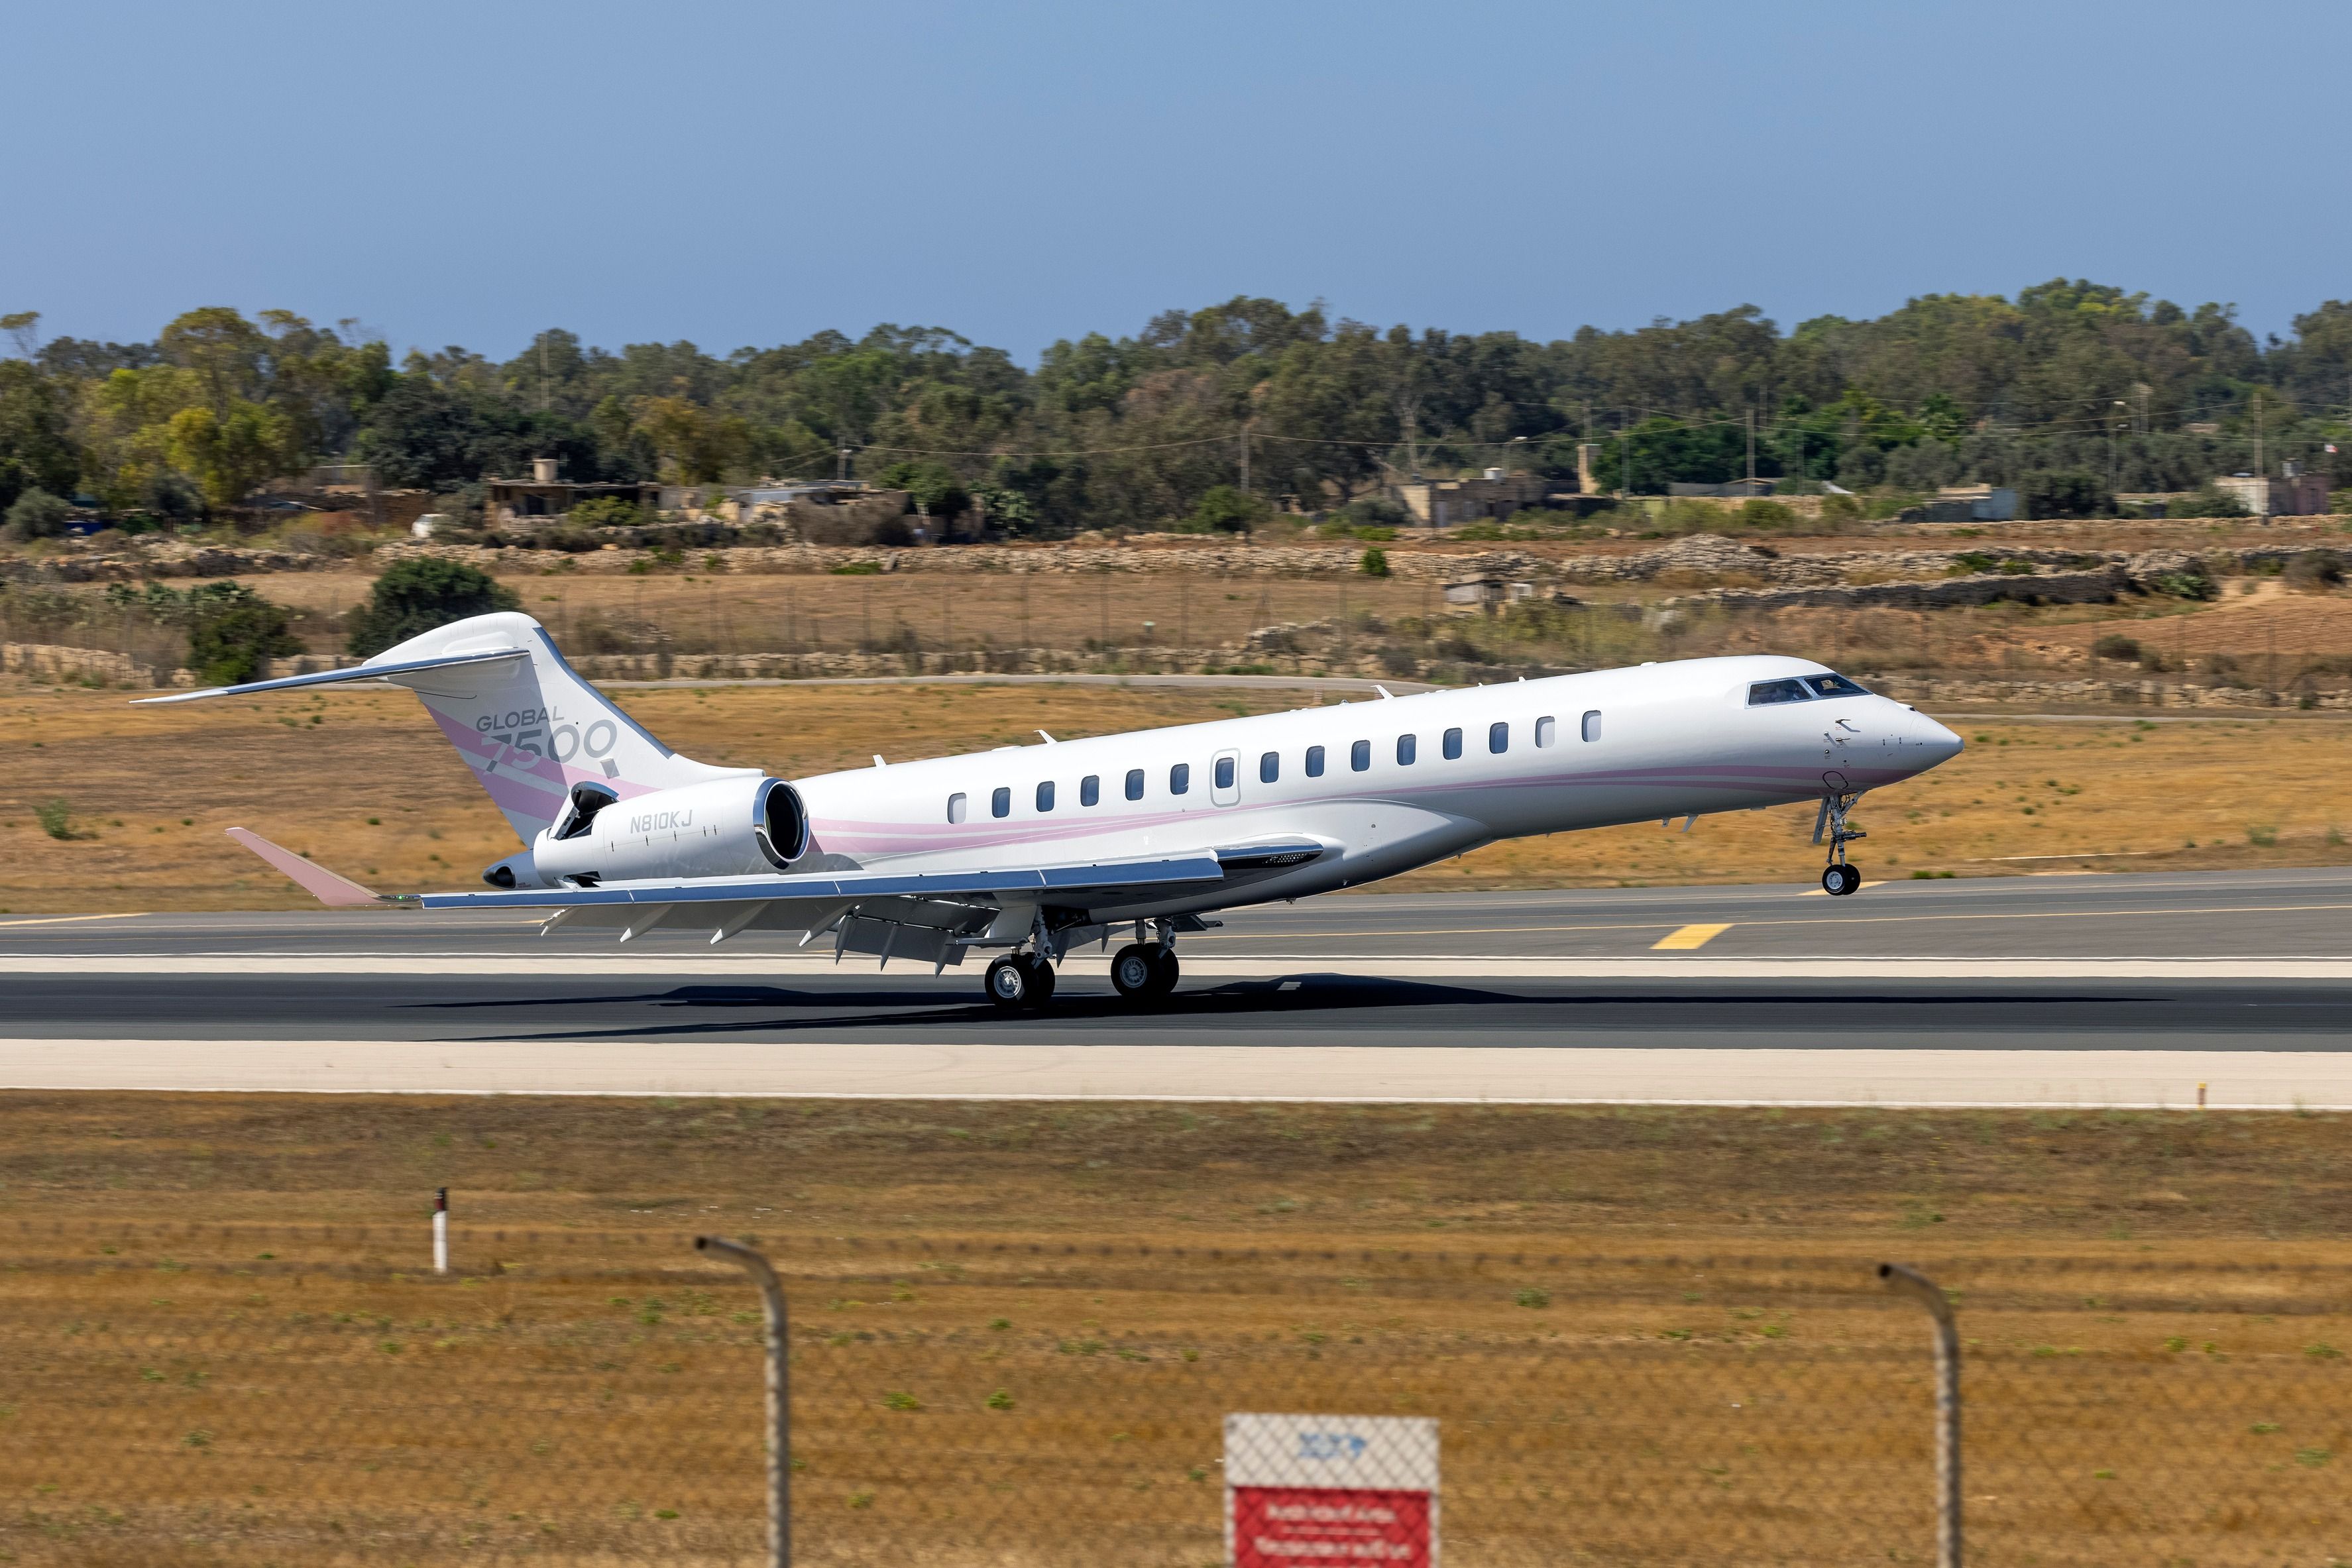 Kylie Jenner's Bombardier Global 7500 as it takes off from Malta.